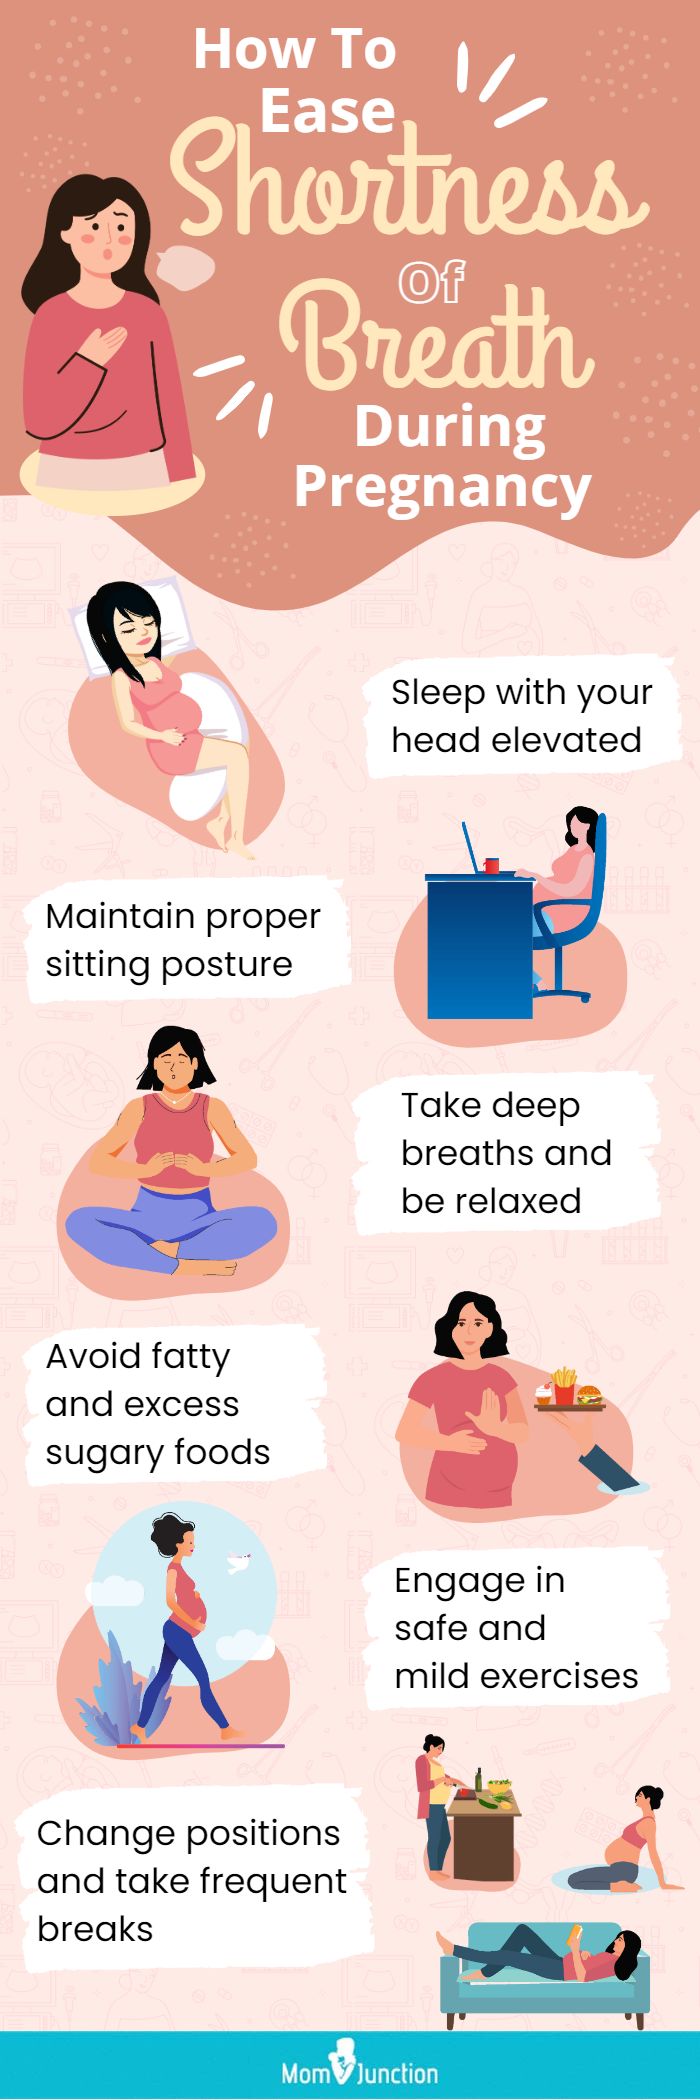 how to ease shortness of breath during pregnancy (infographic)